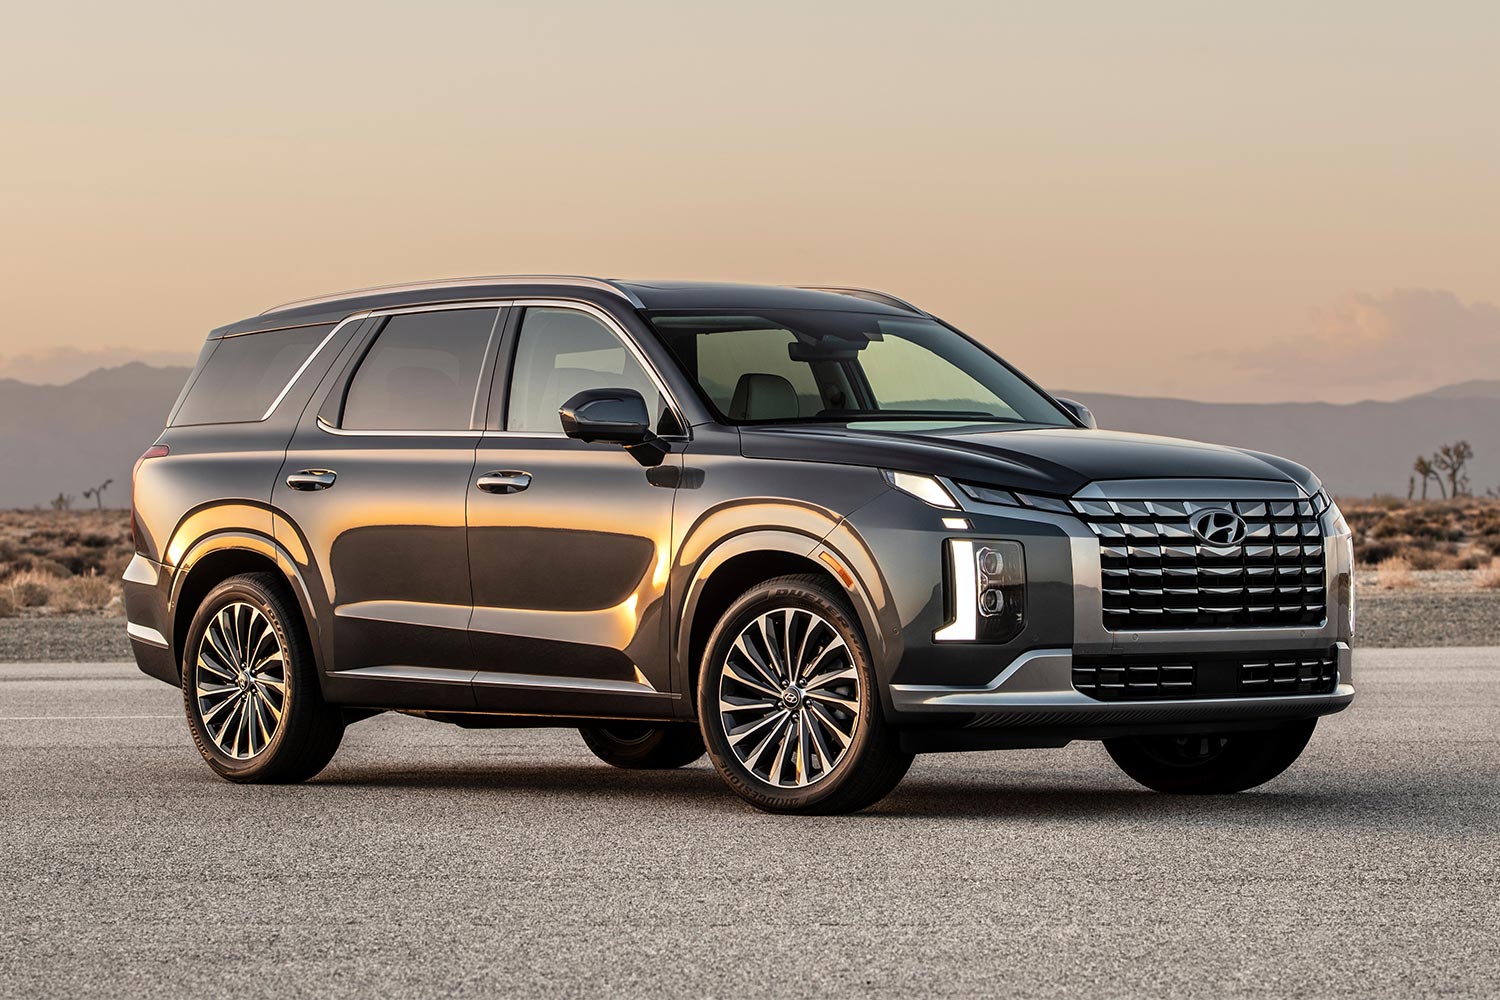 The 2023 Hyundai Palisade SUV, which features a new grille and lighting elements on the outside